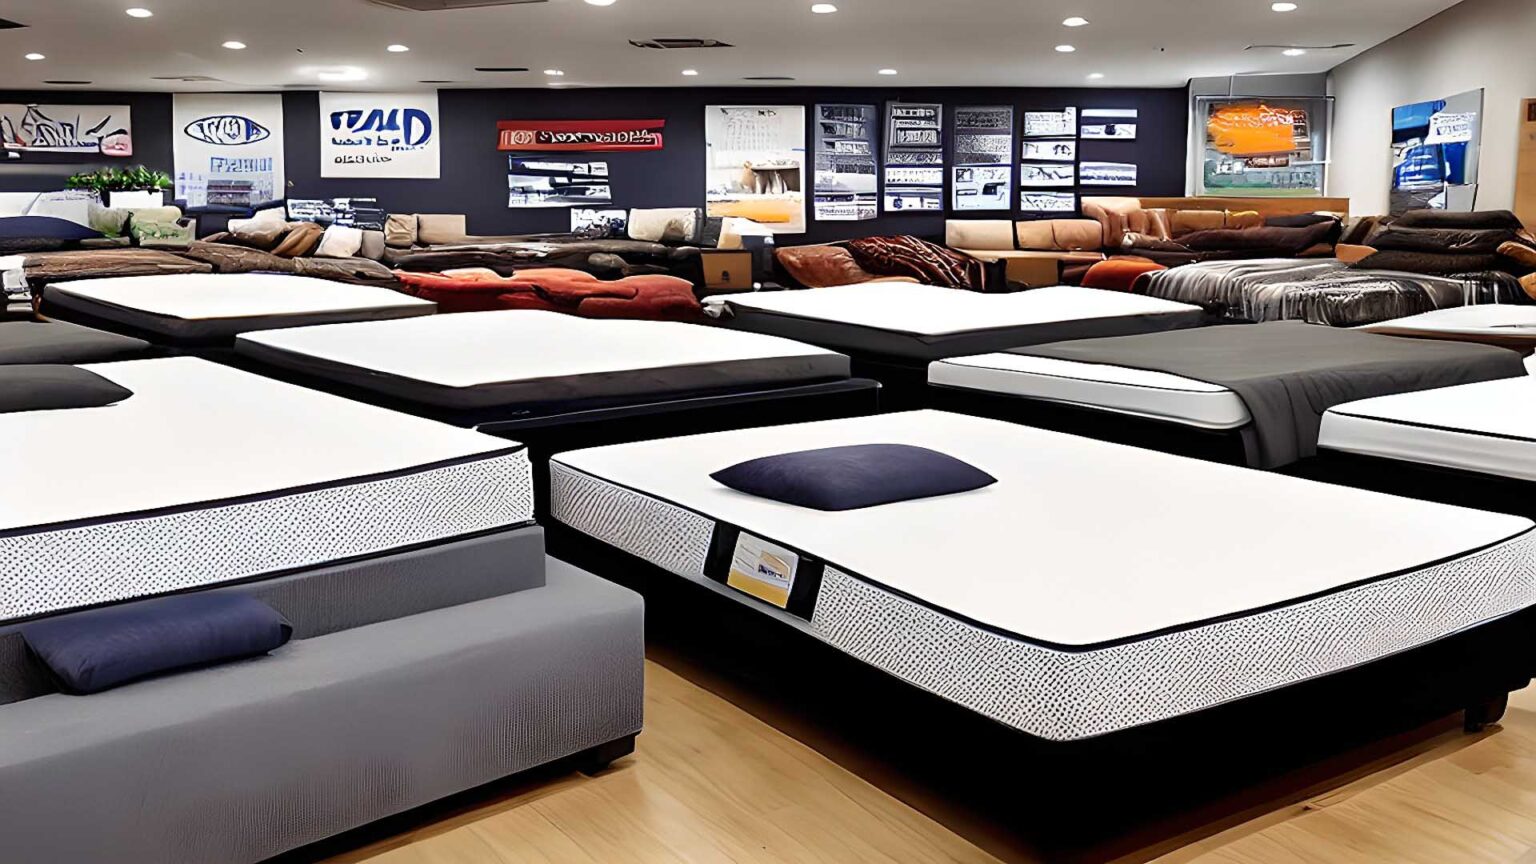 Mattress Stores, mattress dealers, and mattress retailers near me in Rowland Heights, CA